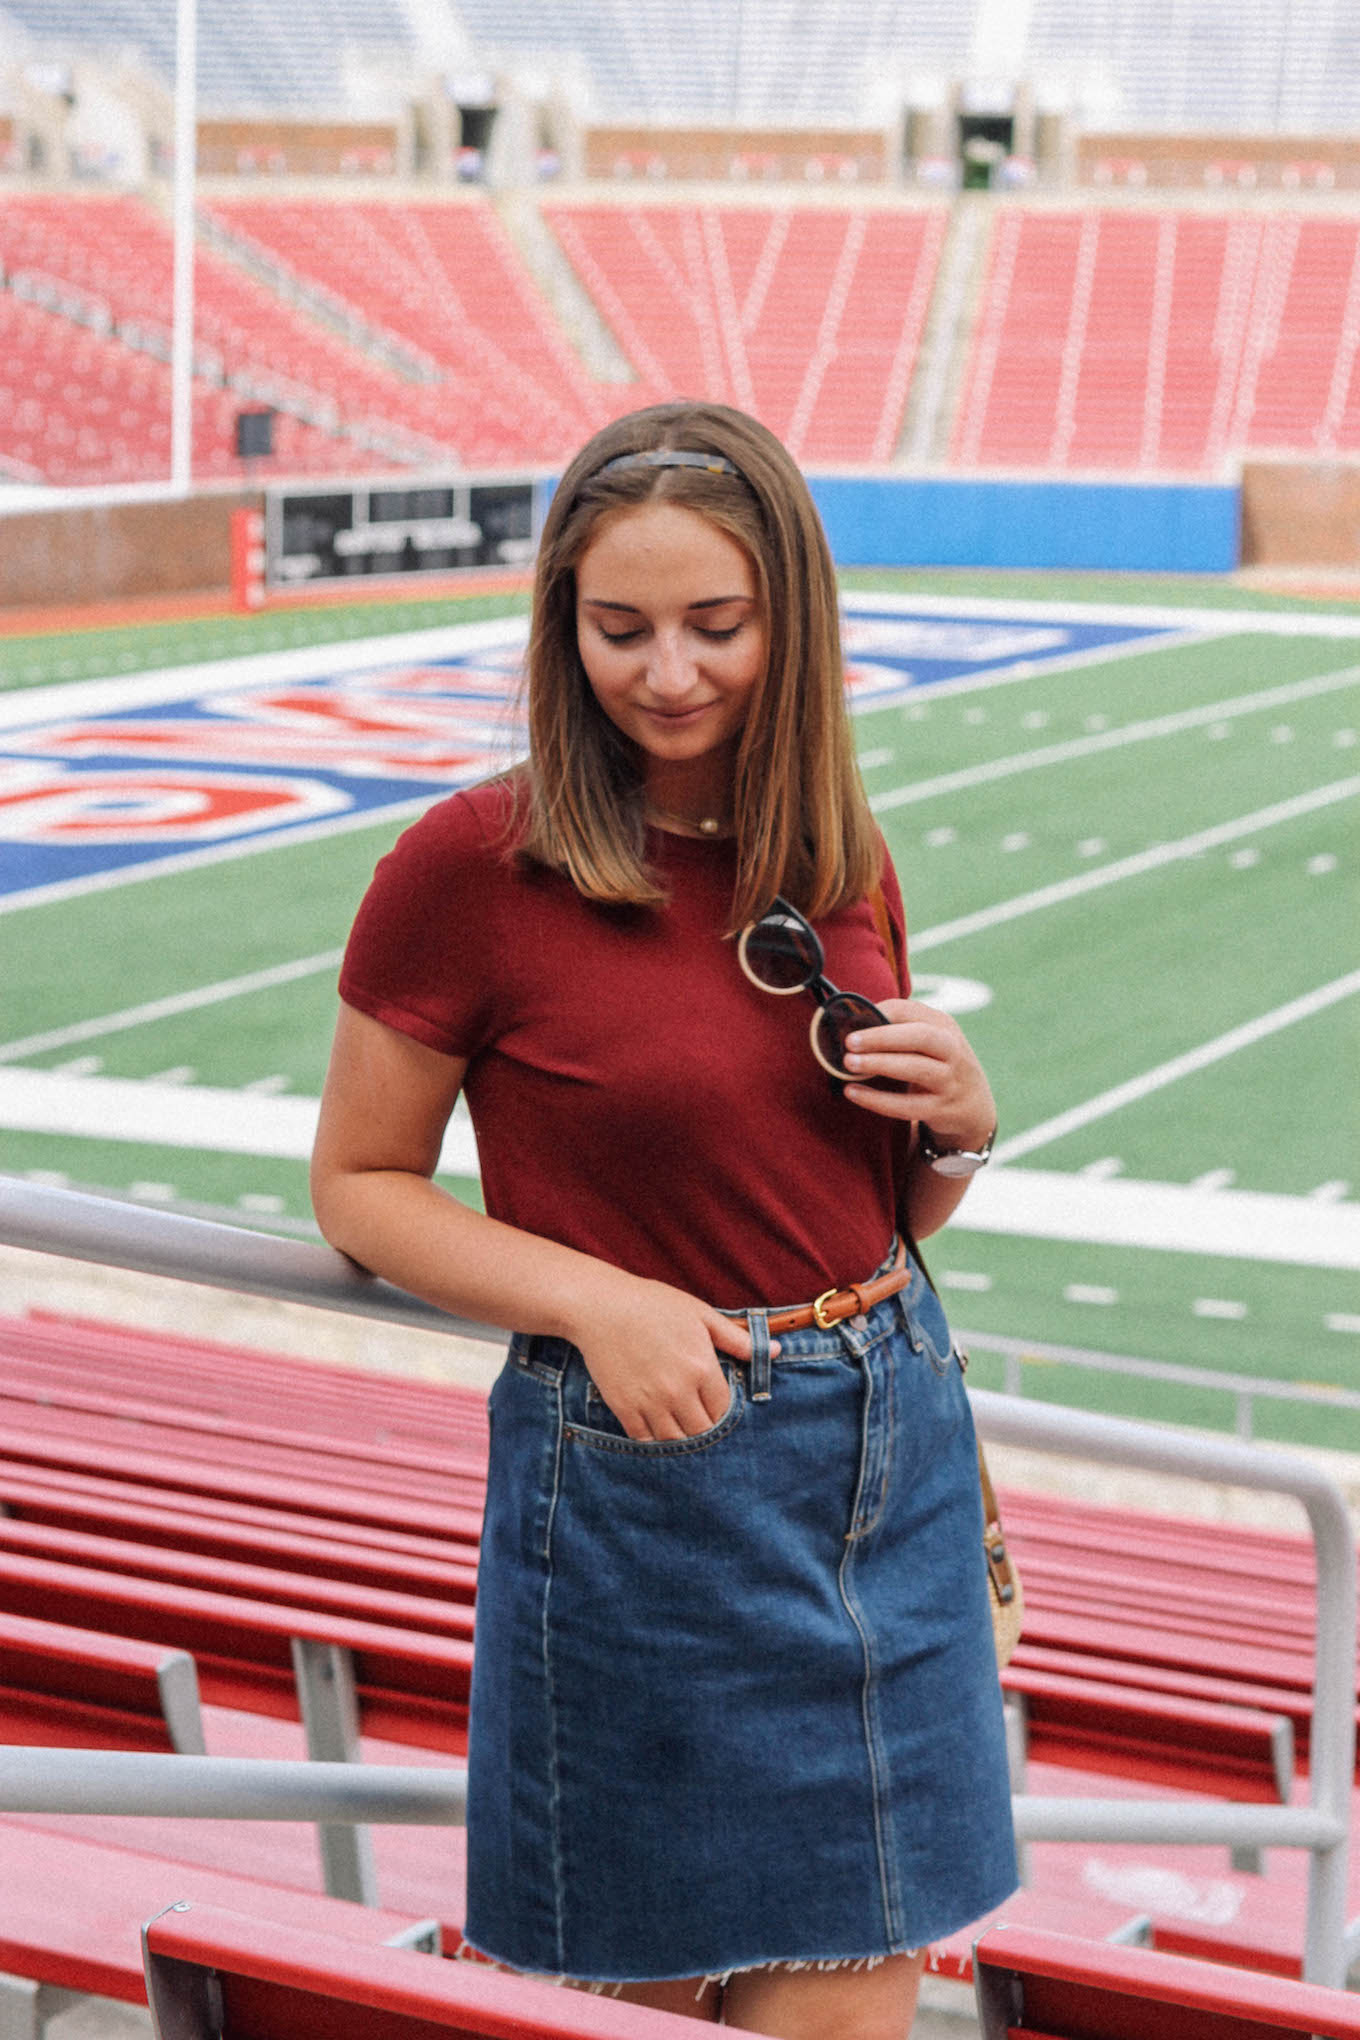 Get Ready for Game Day with Simple Contacts